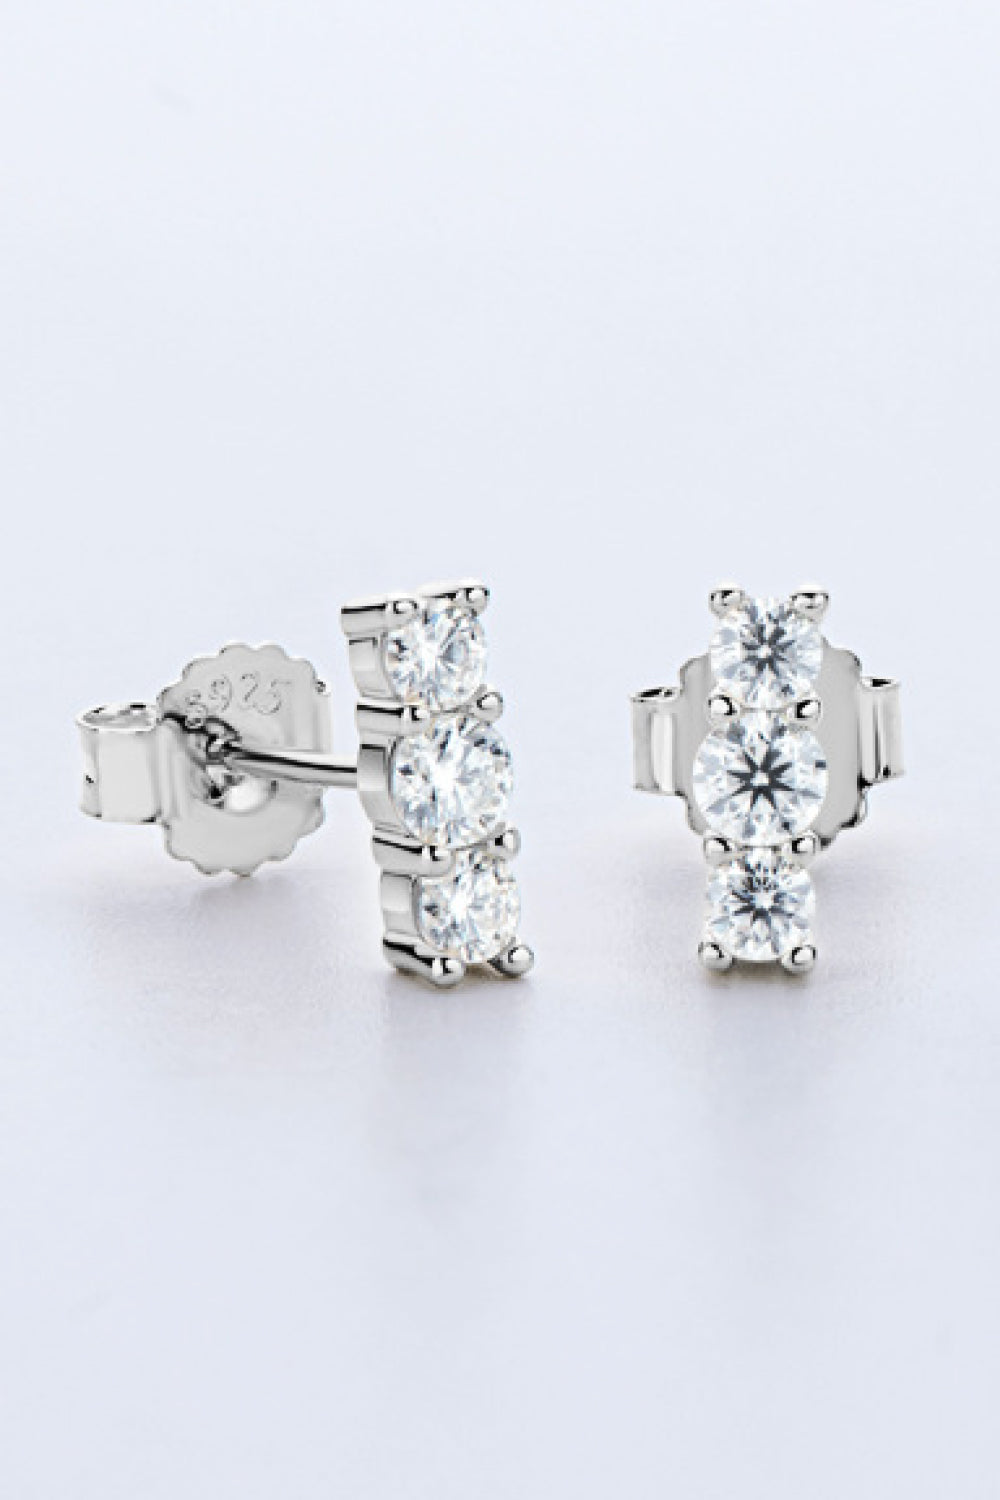 Heartbeat Rhythm 925 Sterling Silver Moissanite Stud Earrings-Earrings-Inspired by Justeen-Women's Clothing Boutique in Chicago, Illinois